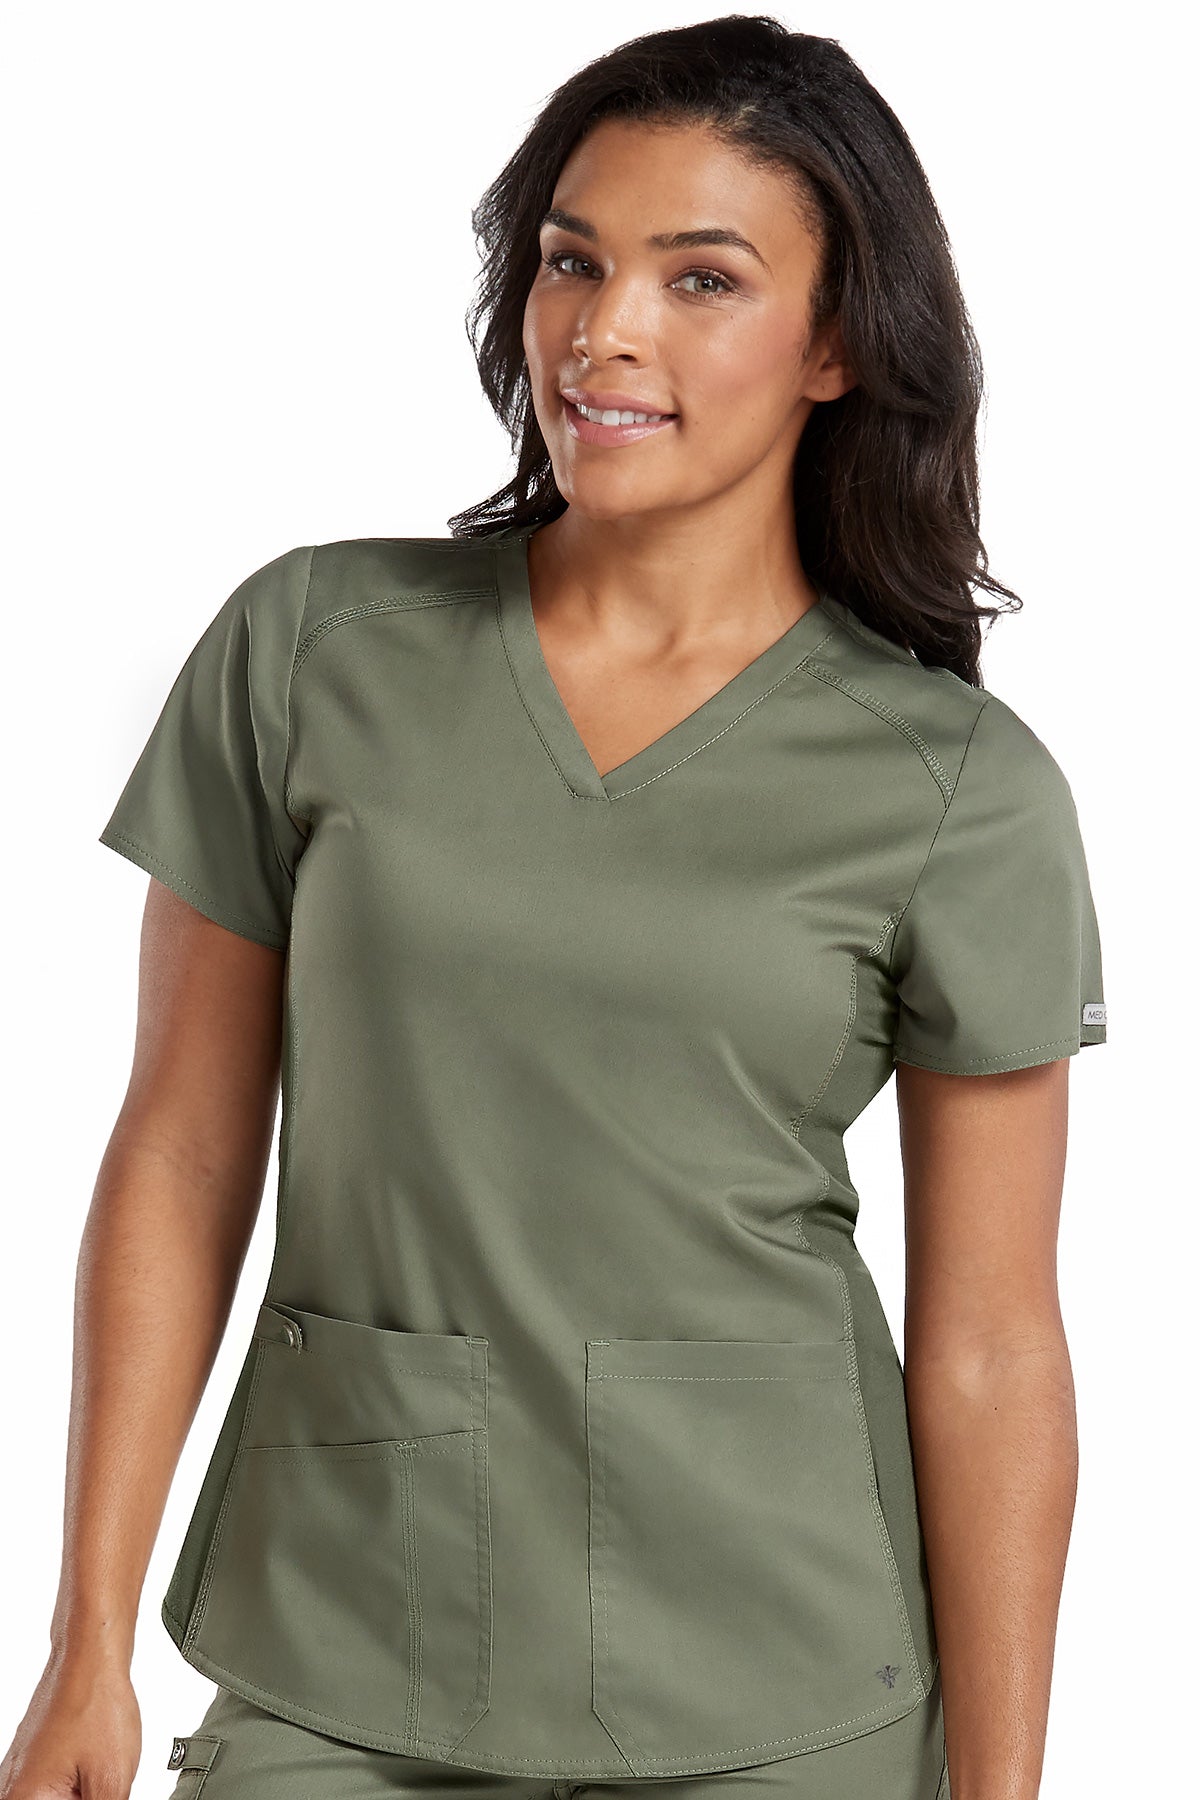 Med Couture Scrub Top Touch Shirttail V-Neck in Olive at Parker's Clothing and Shoes.